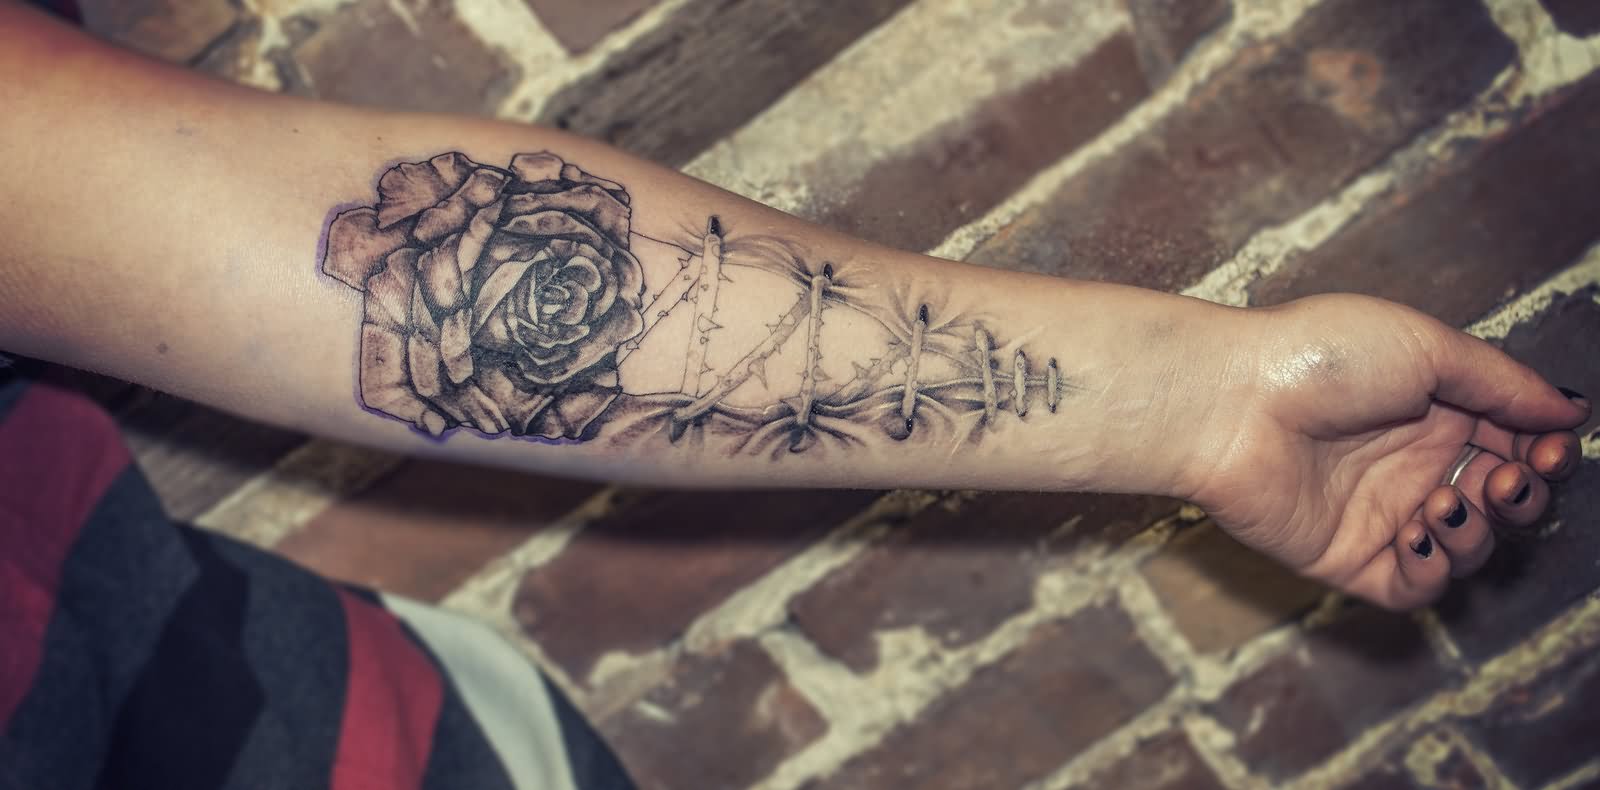 Black And Grey Rose With Corset Tattoo On Forearm By RemiisMeltingDots